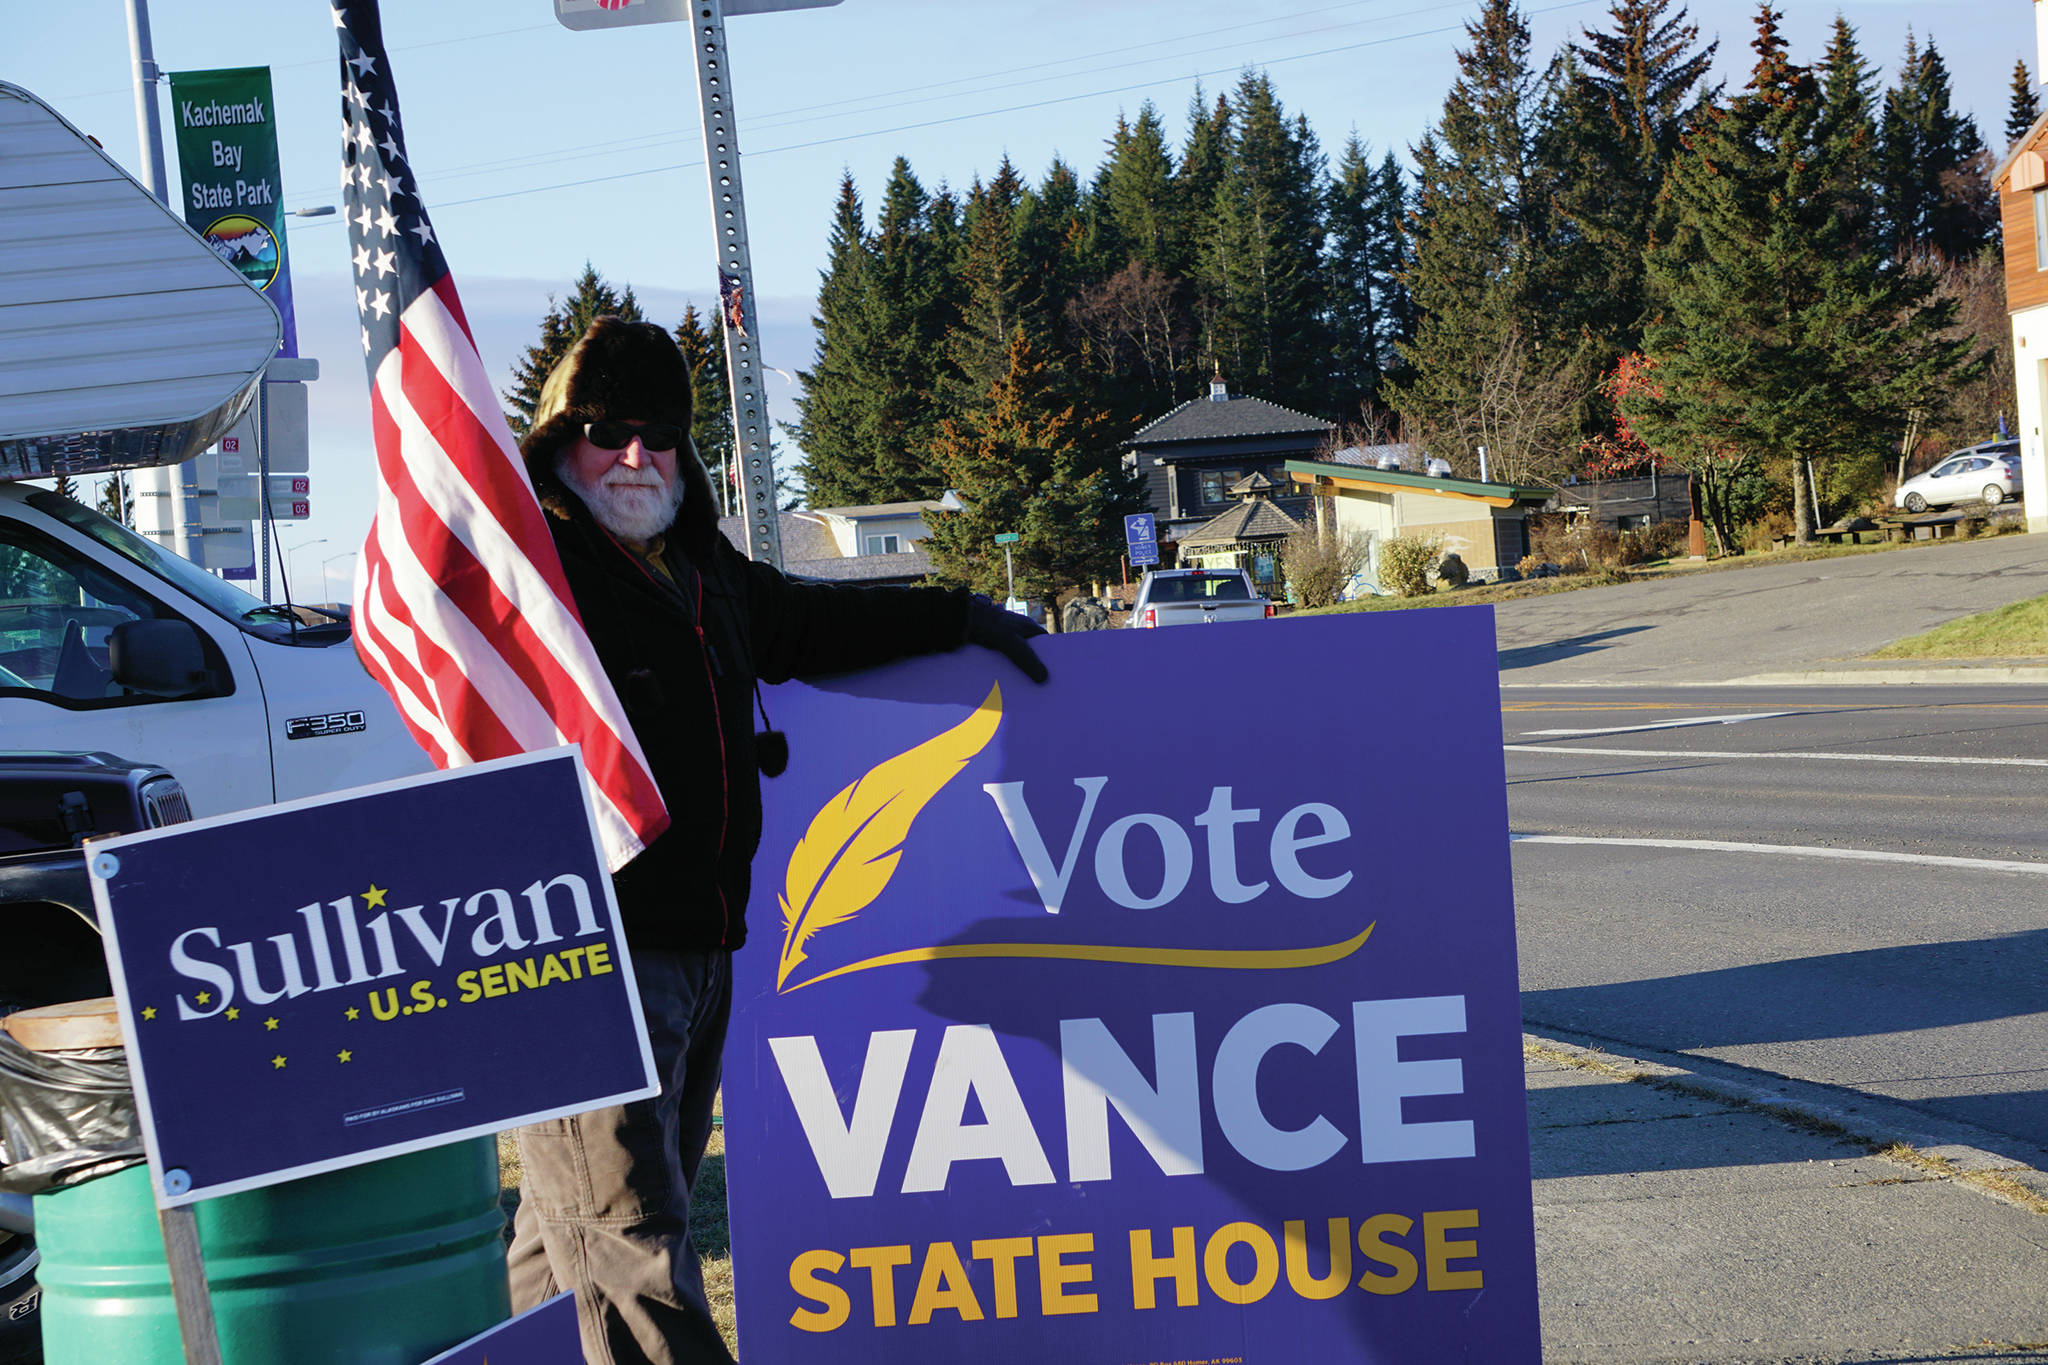 Raymond Walker holds a sign on Tuesday, Nov. 3, 2020, for his daughter, Sarah Vance, on Pioneer Avenue in Homer, Alaska. A Republican, Vance is running for reelection for District 31 Representative in the Alaska Legislature against Independent Kelly Cooper. Walker also holds a sign for Sen. Dan Sullivan, R-Alaska, who is running for reelection to the U.S. Senate. (Photo by Michael Armstrong/Homer News)